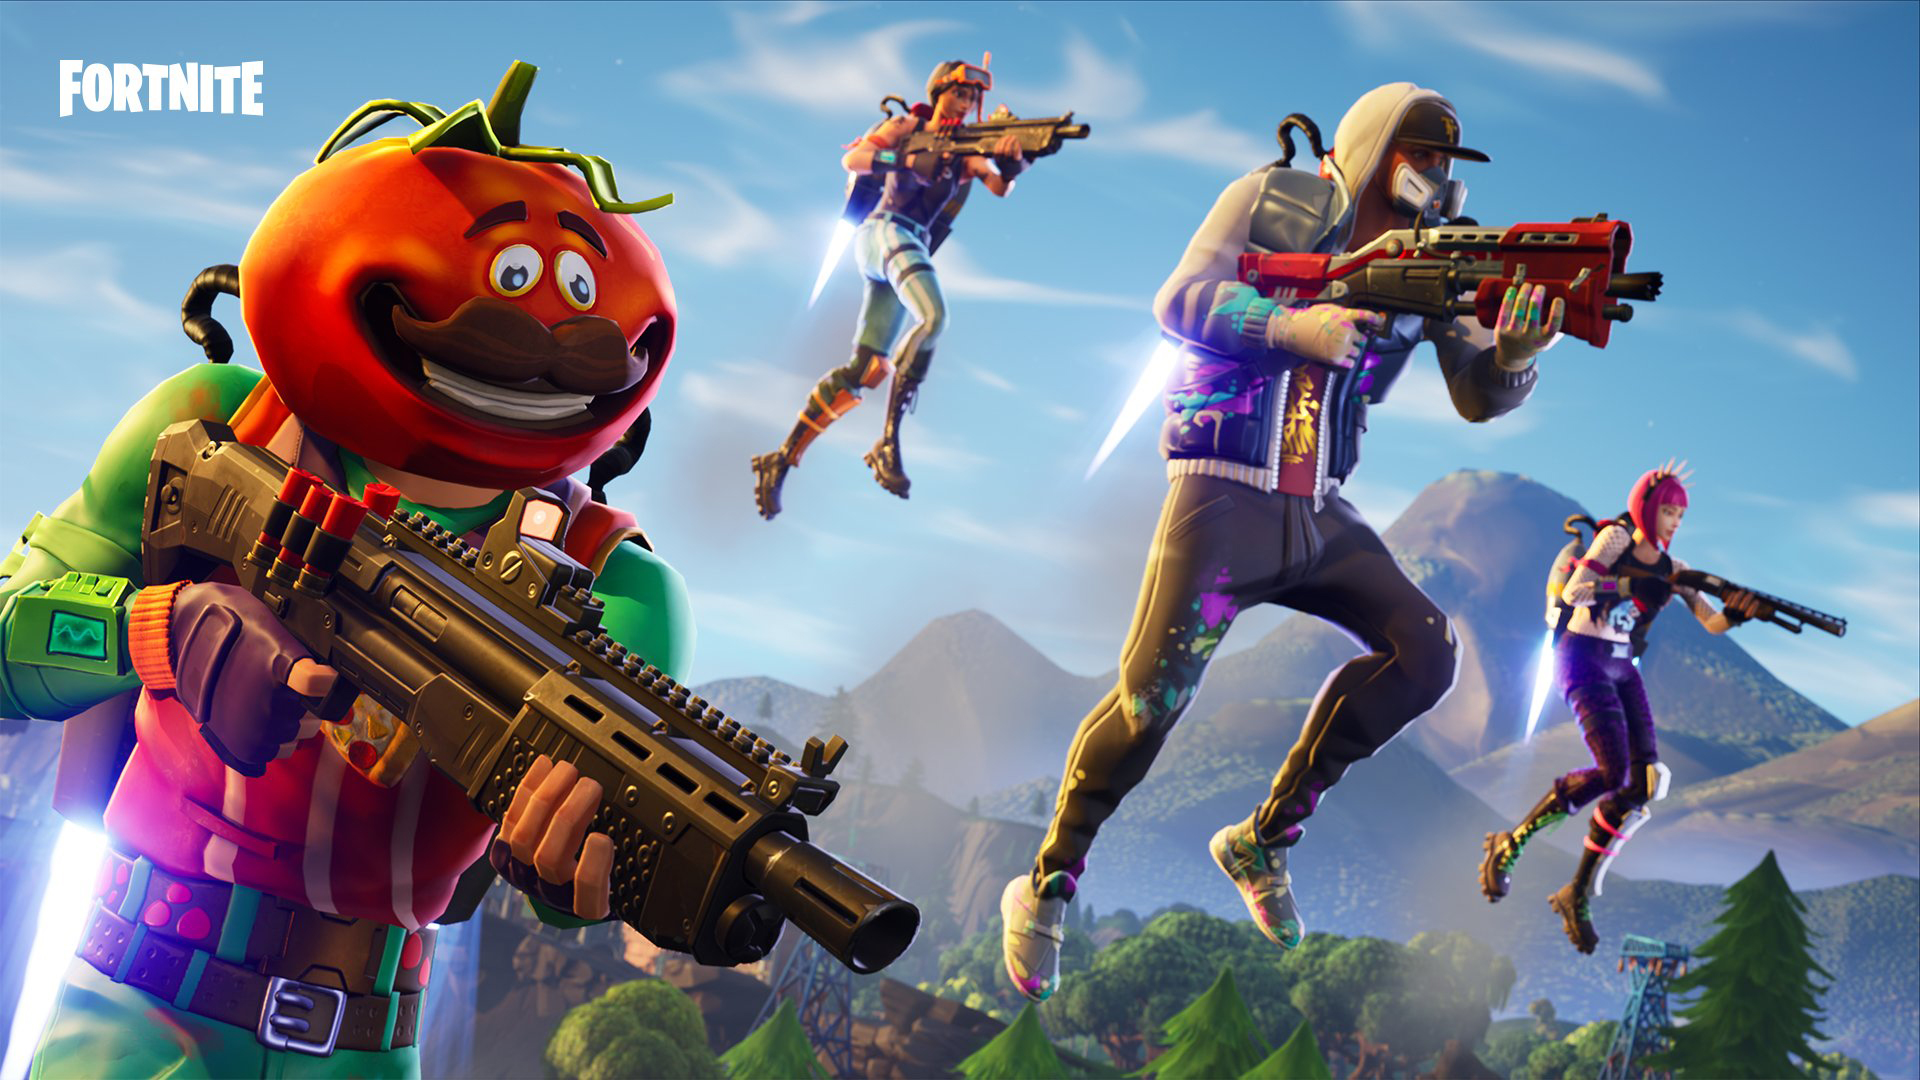 Fortnite Tomatohead Skin Outfit Pngs Image Pro Game Guides